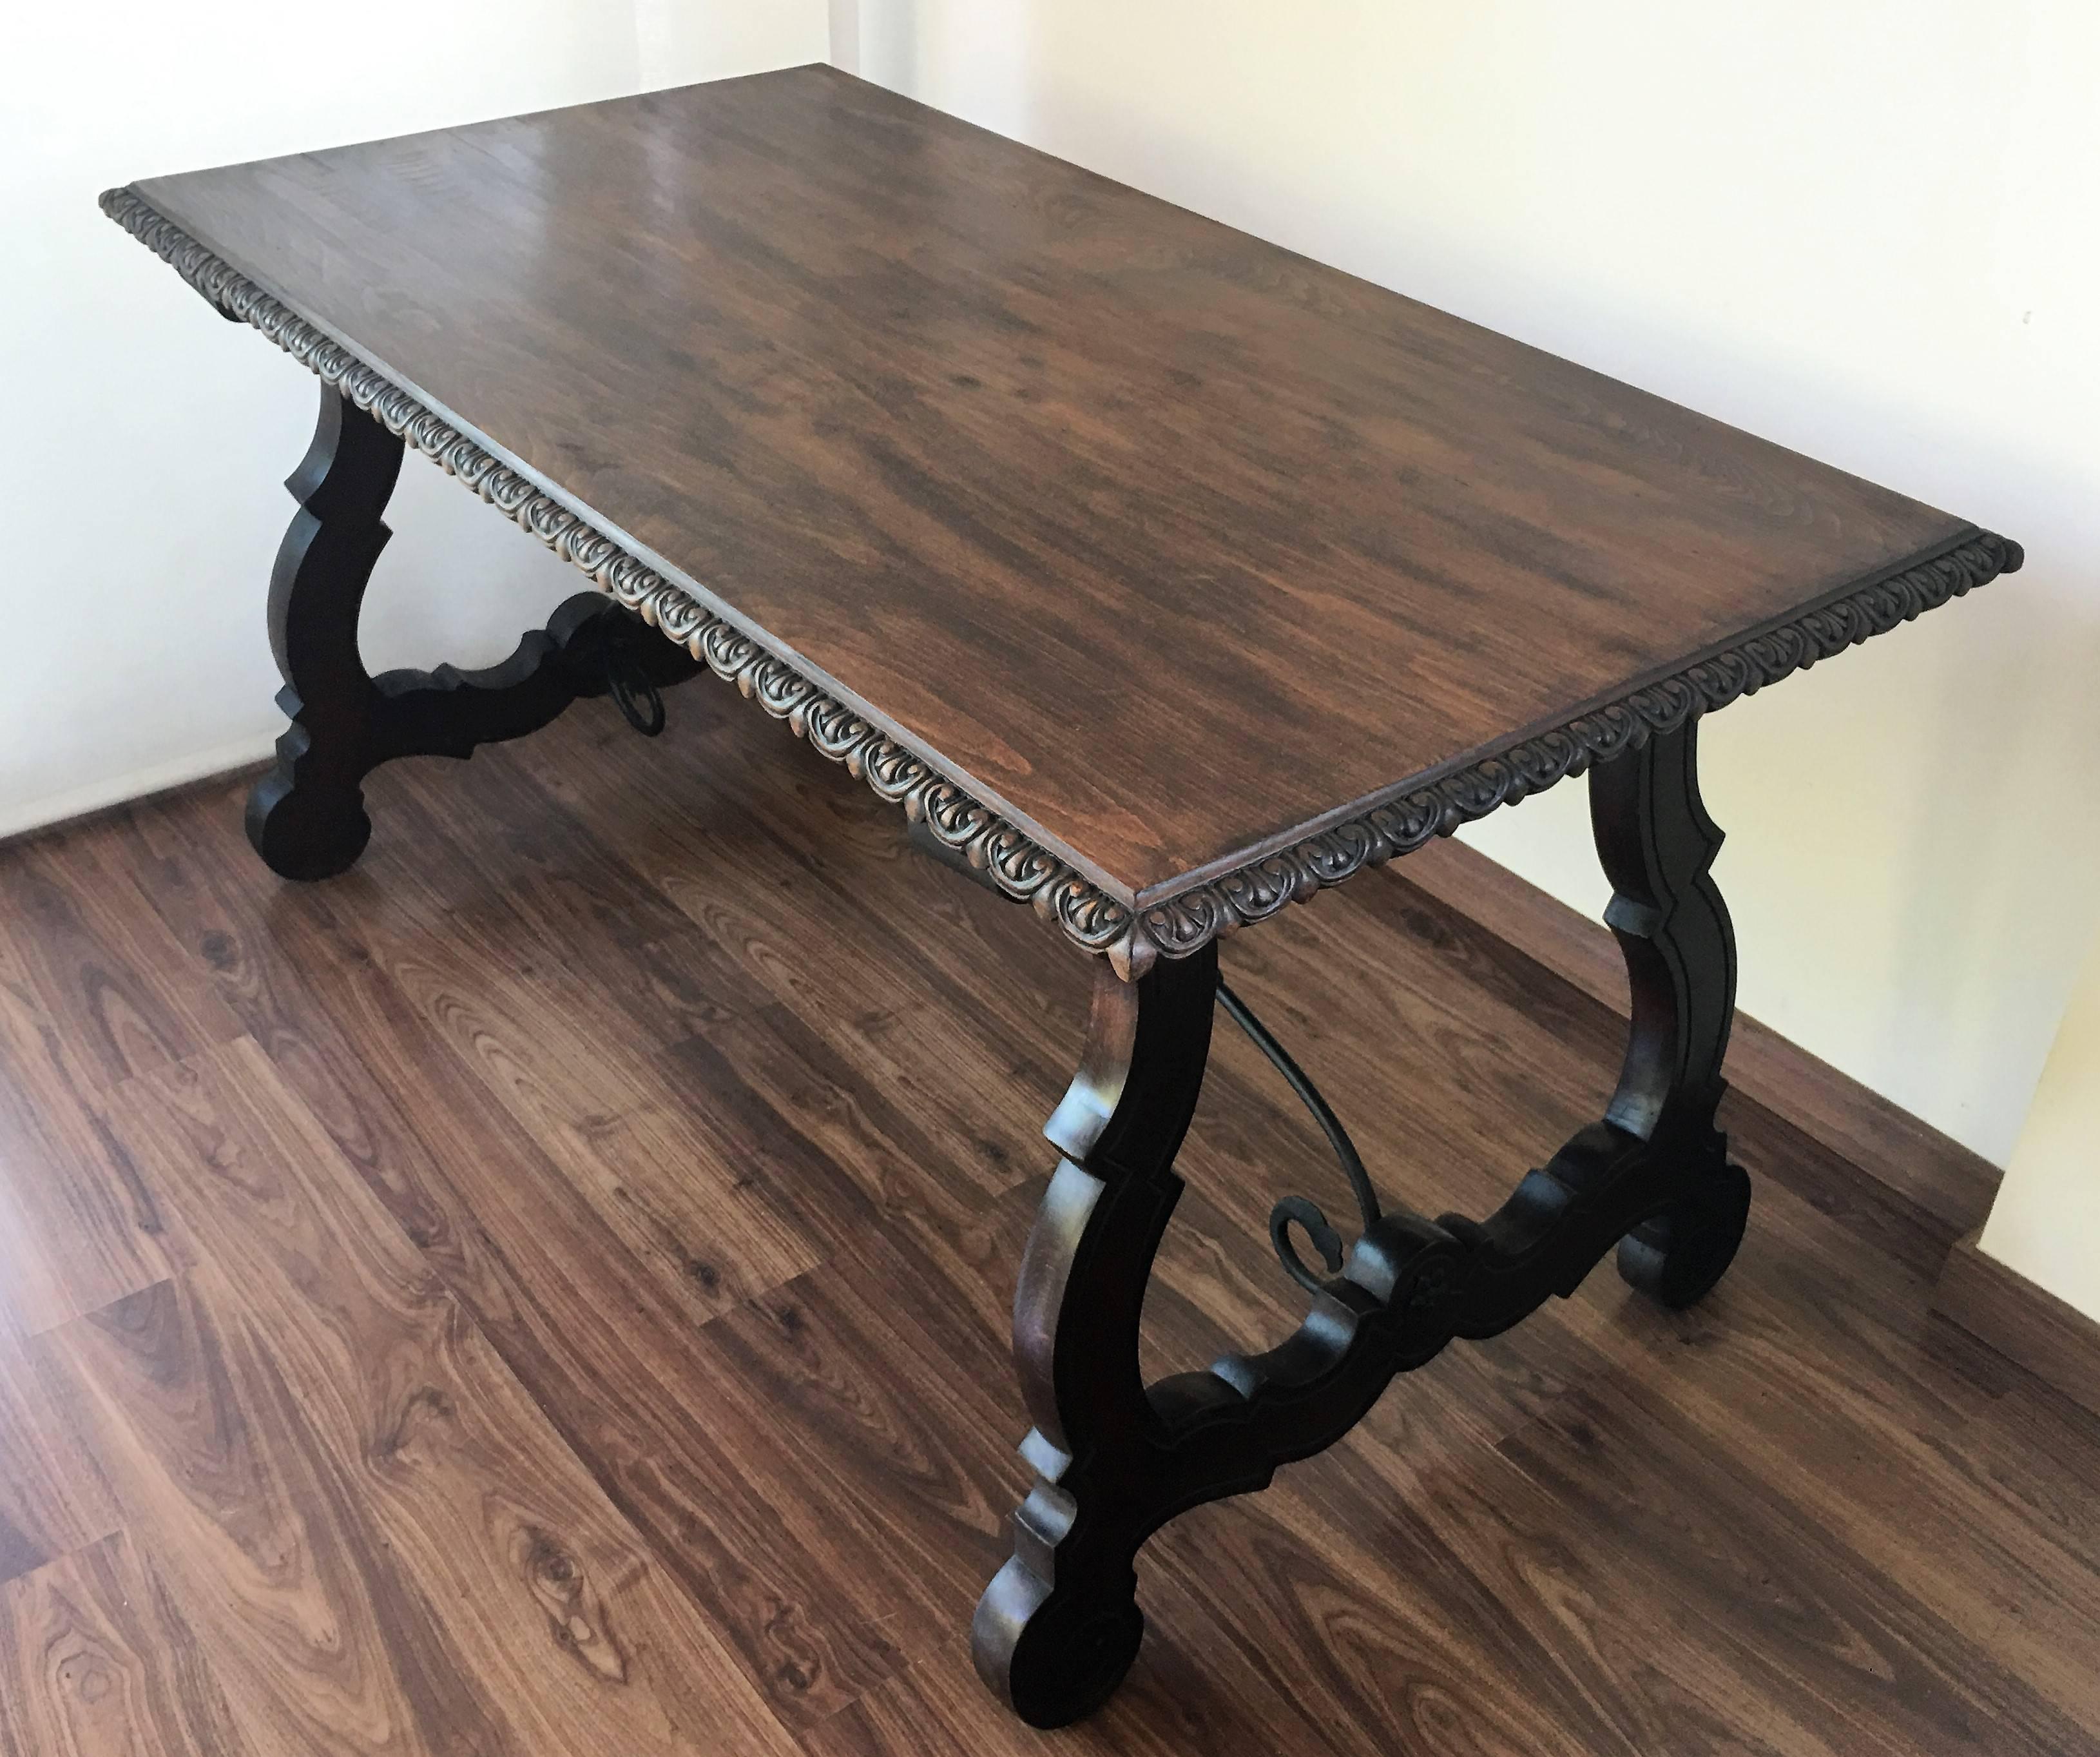 Baroque 19th Century Trestle Farm Table with Lyre Legs and Iron Stretcher